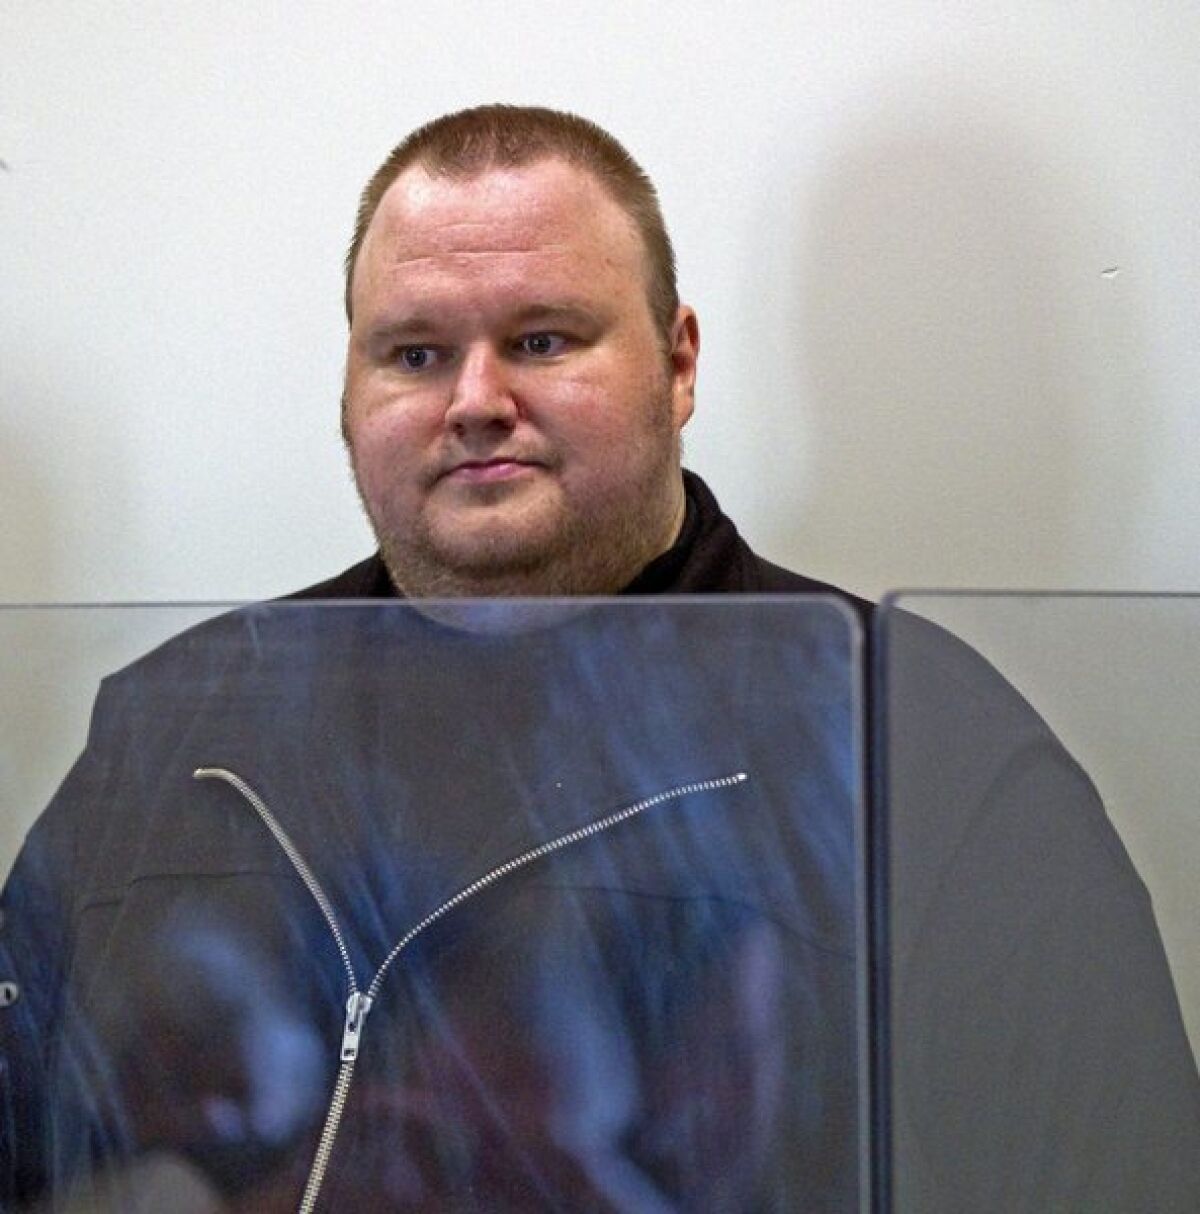 Megaupload founder Kim Dotcom has been charged by the U.S. Justice Department with copyright infringement. Above, Dotcom in custody in New Zealand in January.